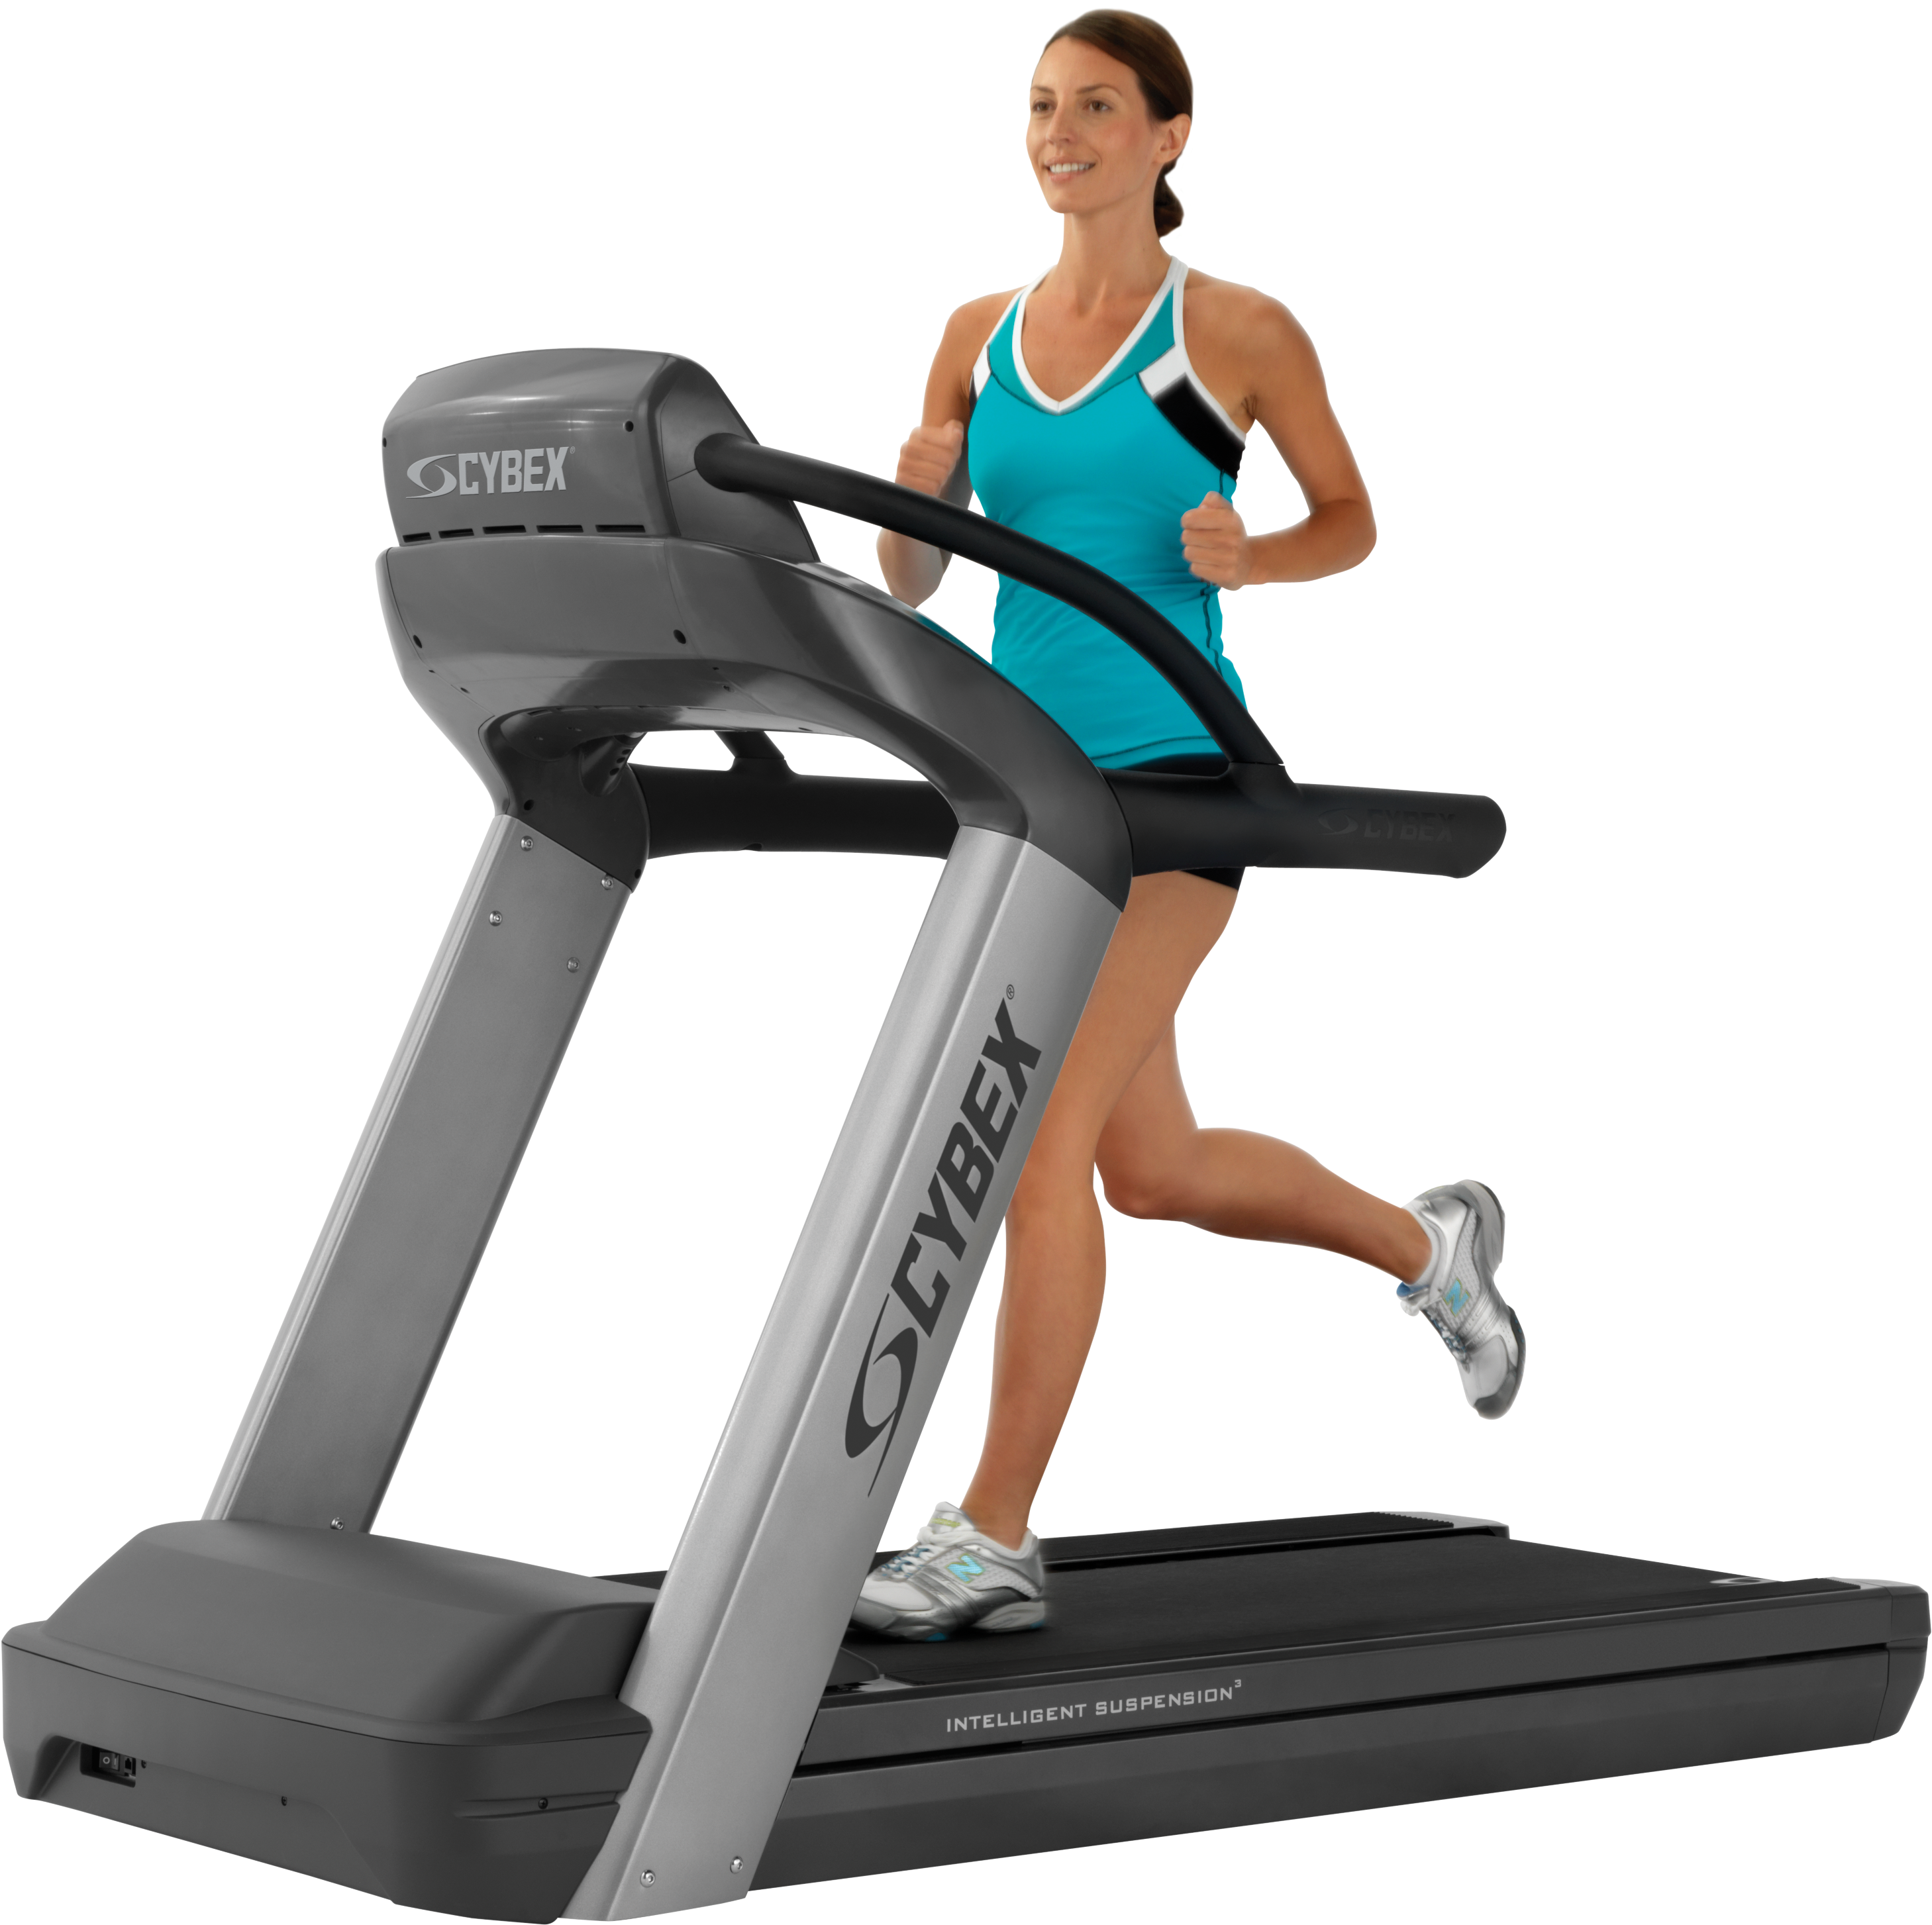 Treadmill Mistakes You Are Making - Cybex 770t Treadmill (3000x3000), Png Download